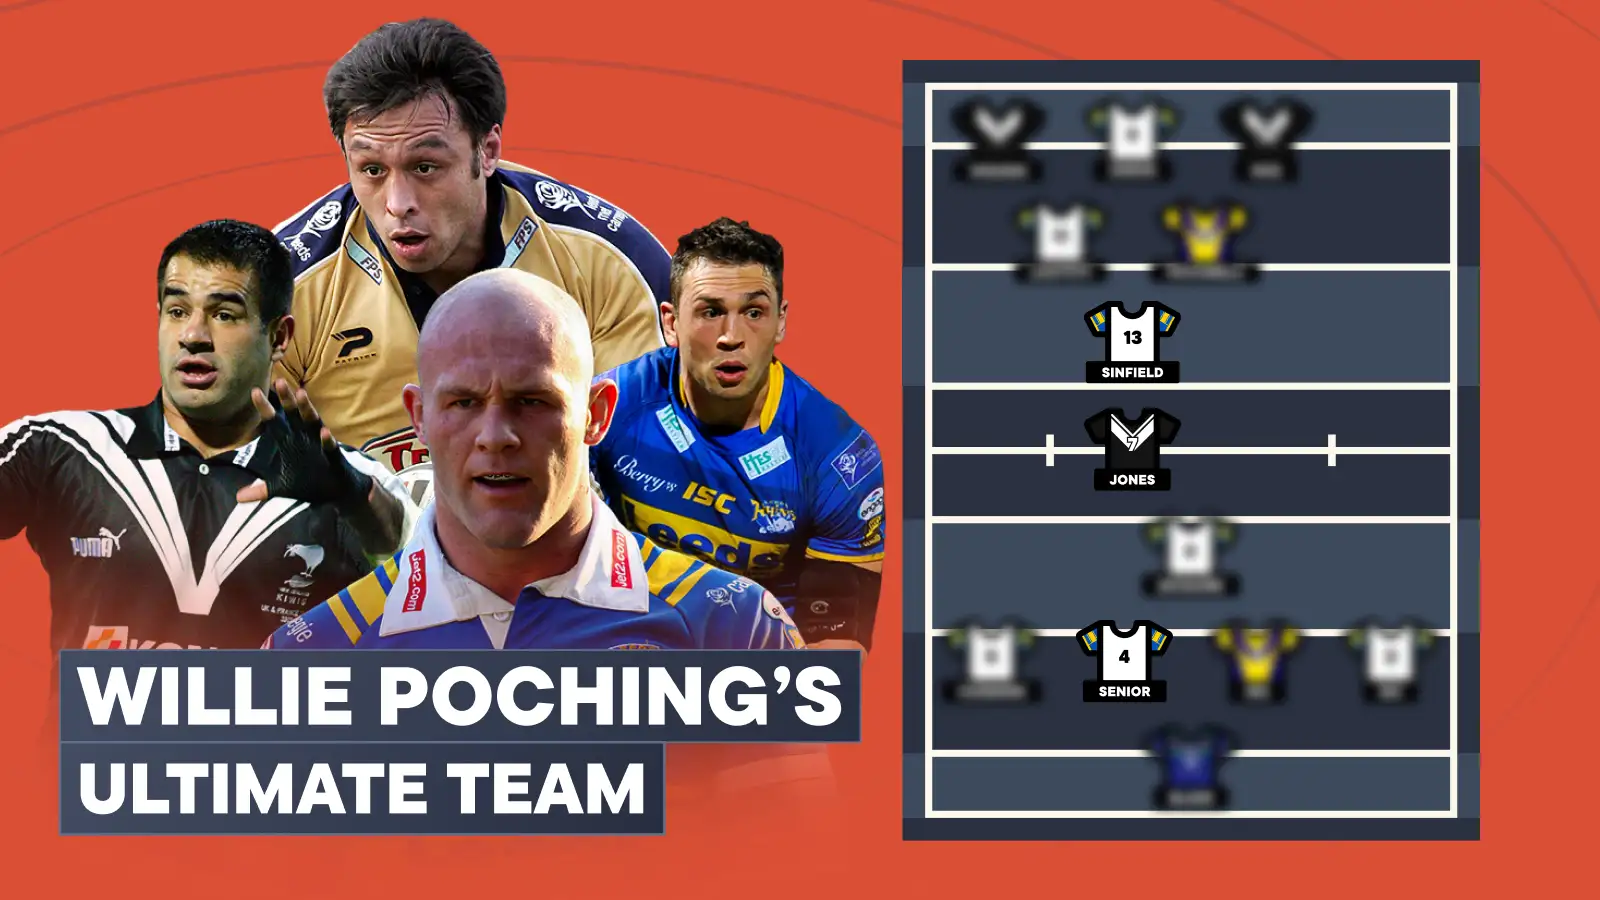 My Ultimate Team: Willie Poching selects his best 1-17 including Leeds Rhinos, New Zealand stars